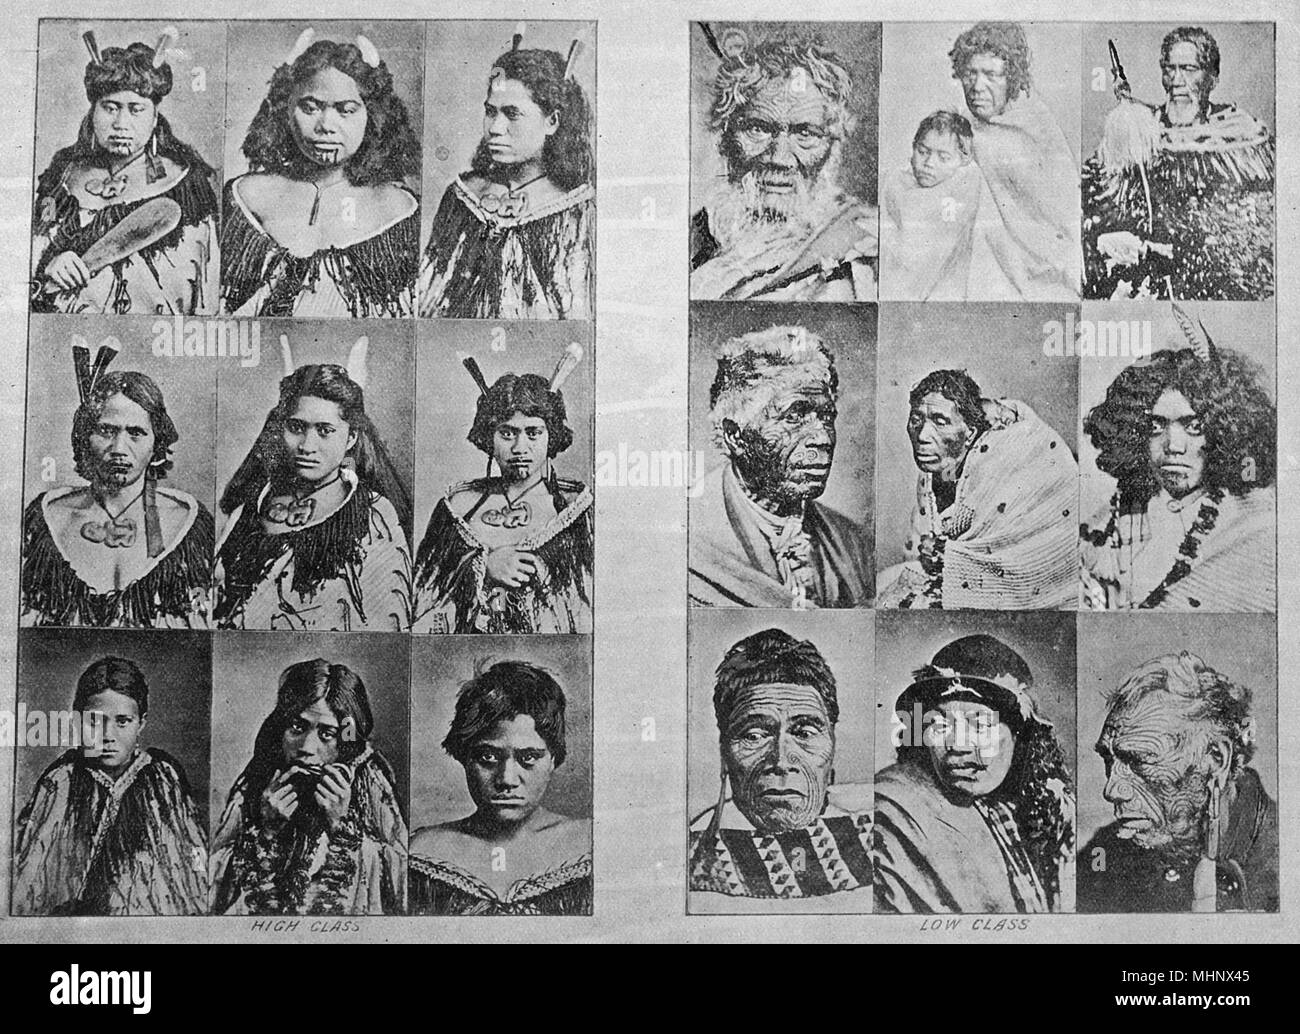 Portraits of Maori types, New Zealand, described as High Class on the left and Low Class on the right.      Date: circa 1900 Stock Photo